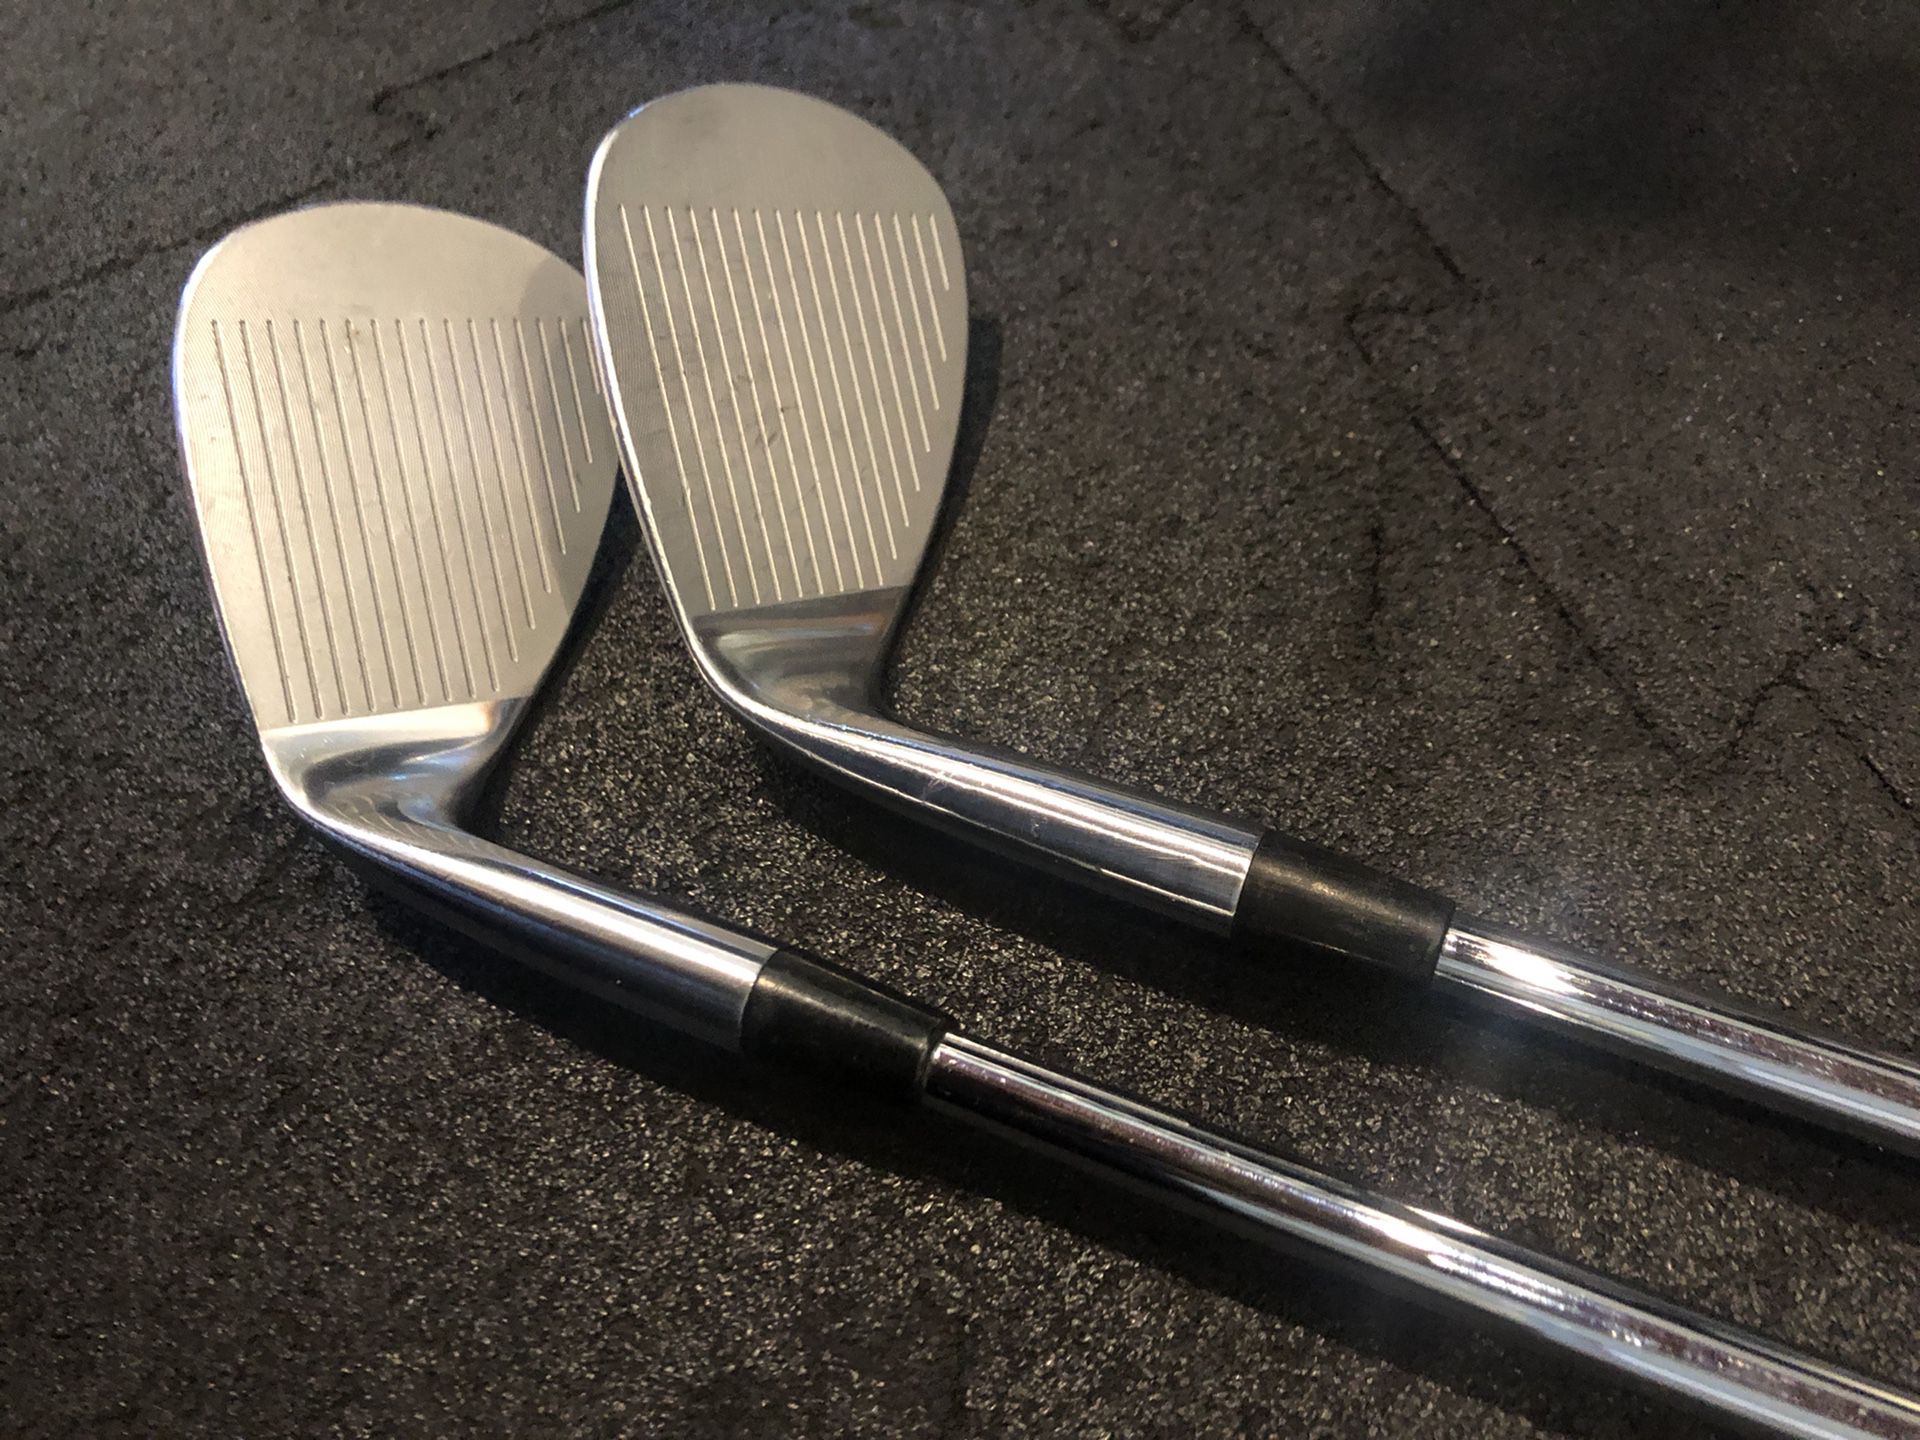 Honma TW-X irons 4-10, 52,56,60 for Sale in Rancho Cucamonga, CA - OfferUp